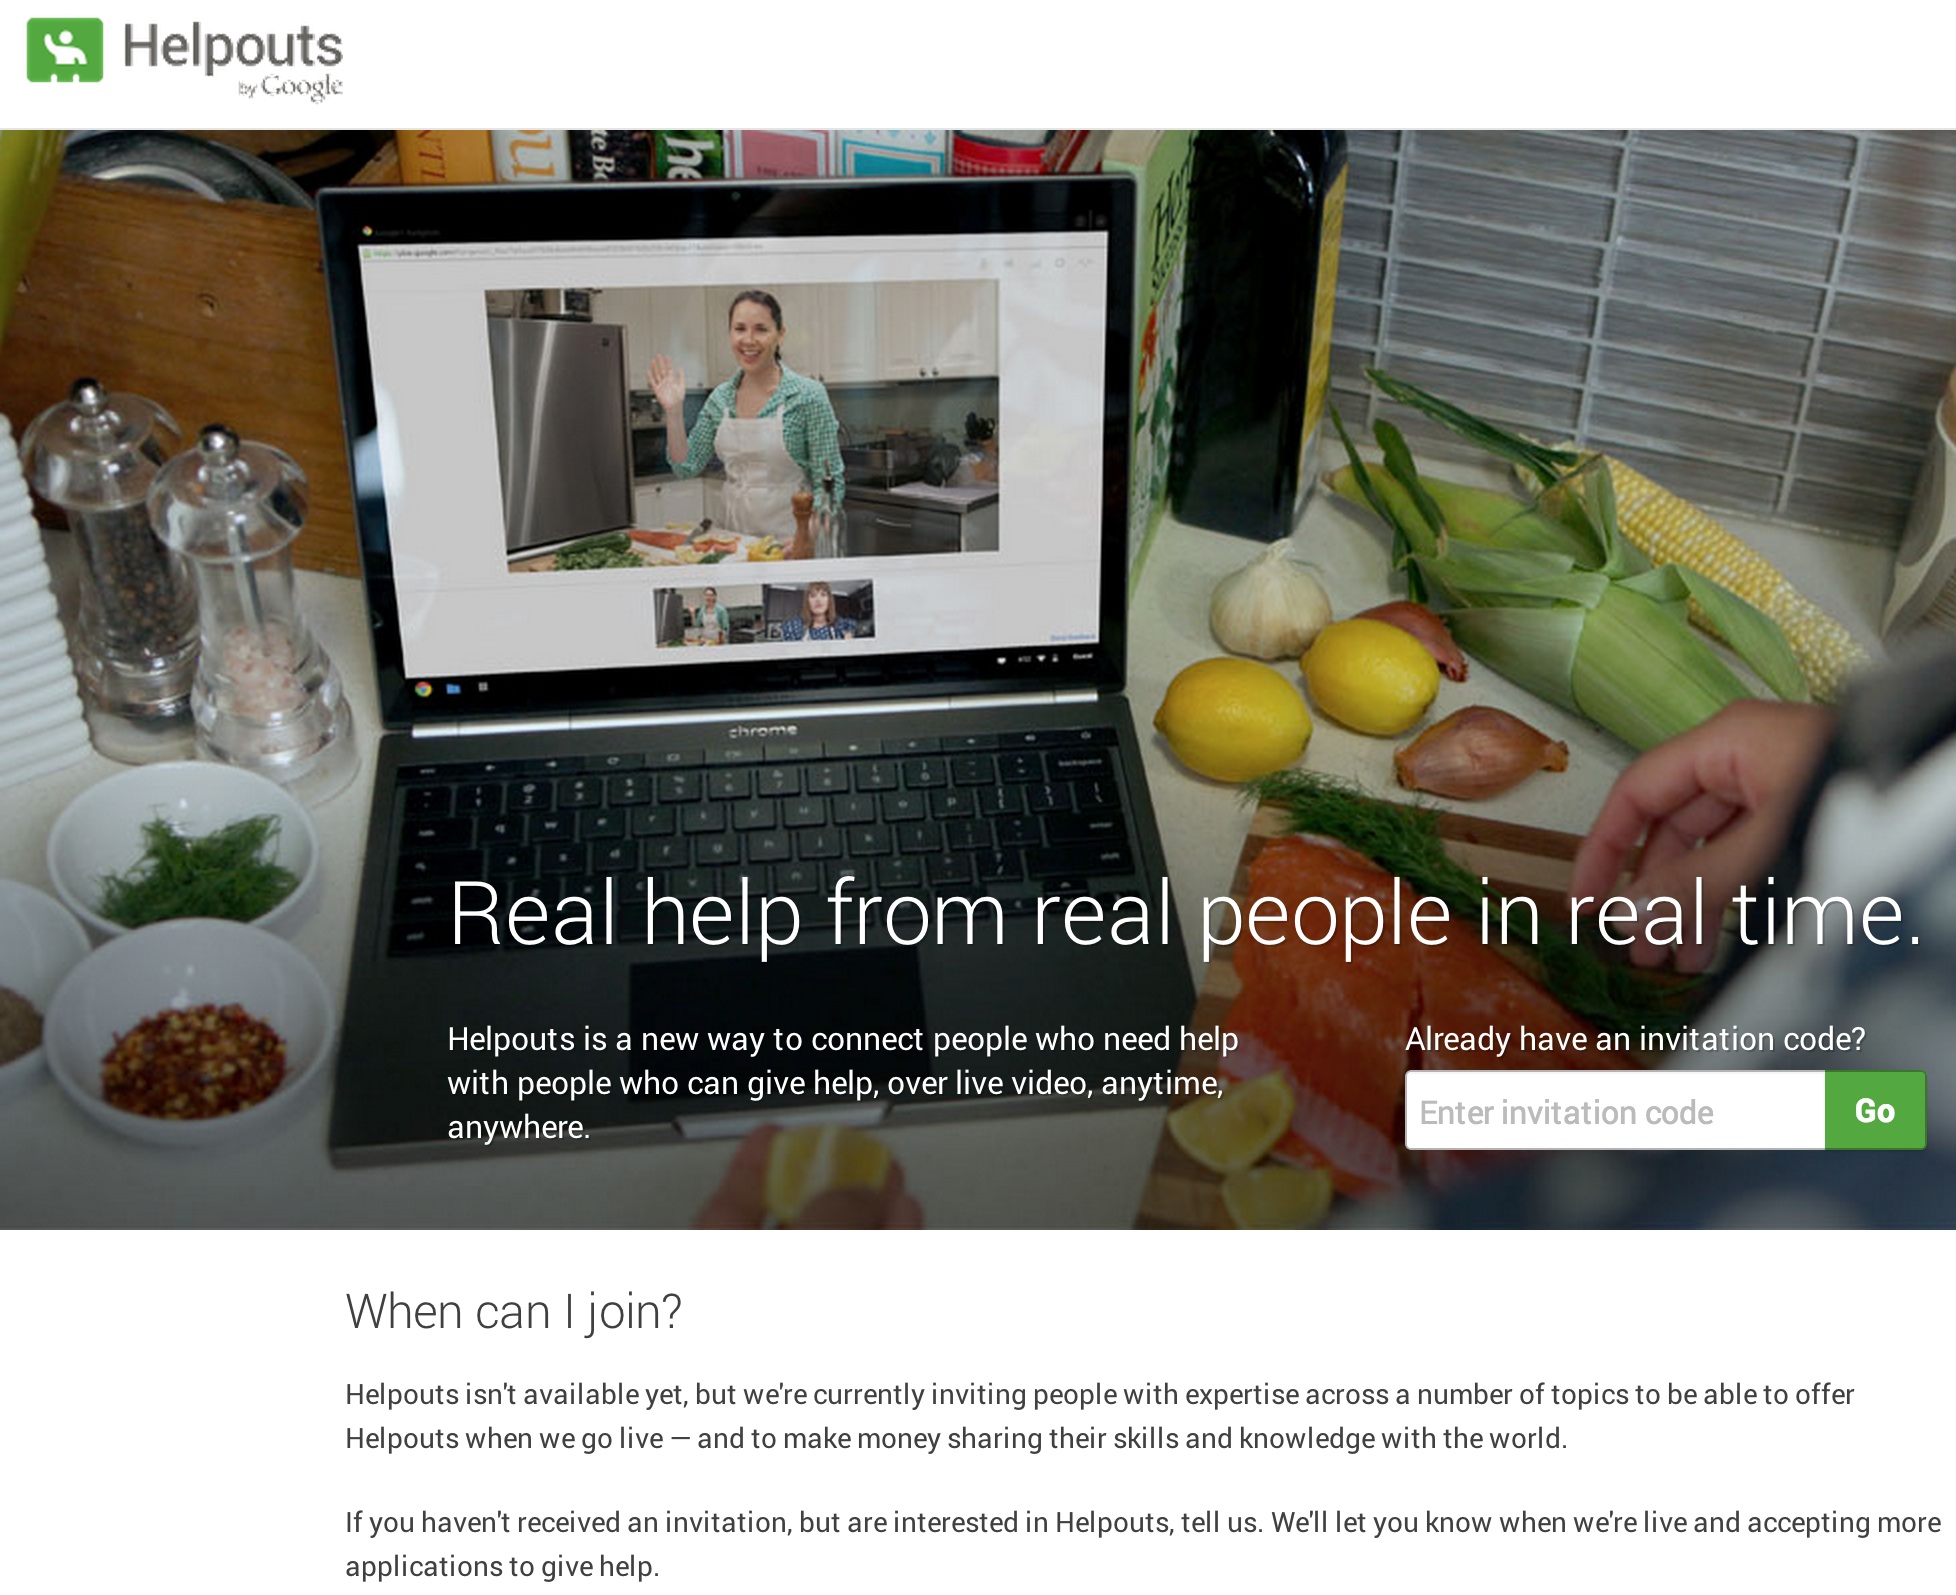 Google-helpouts-learning-tutoring